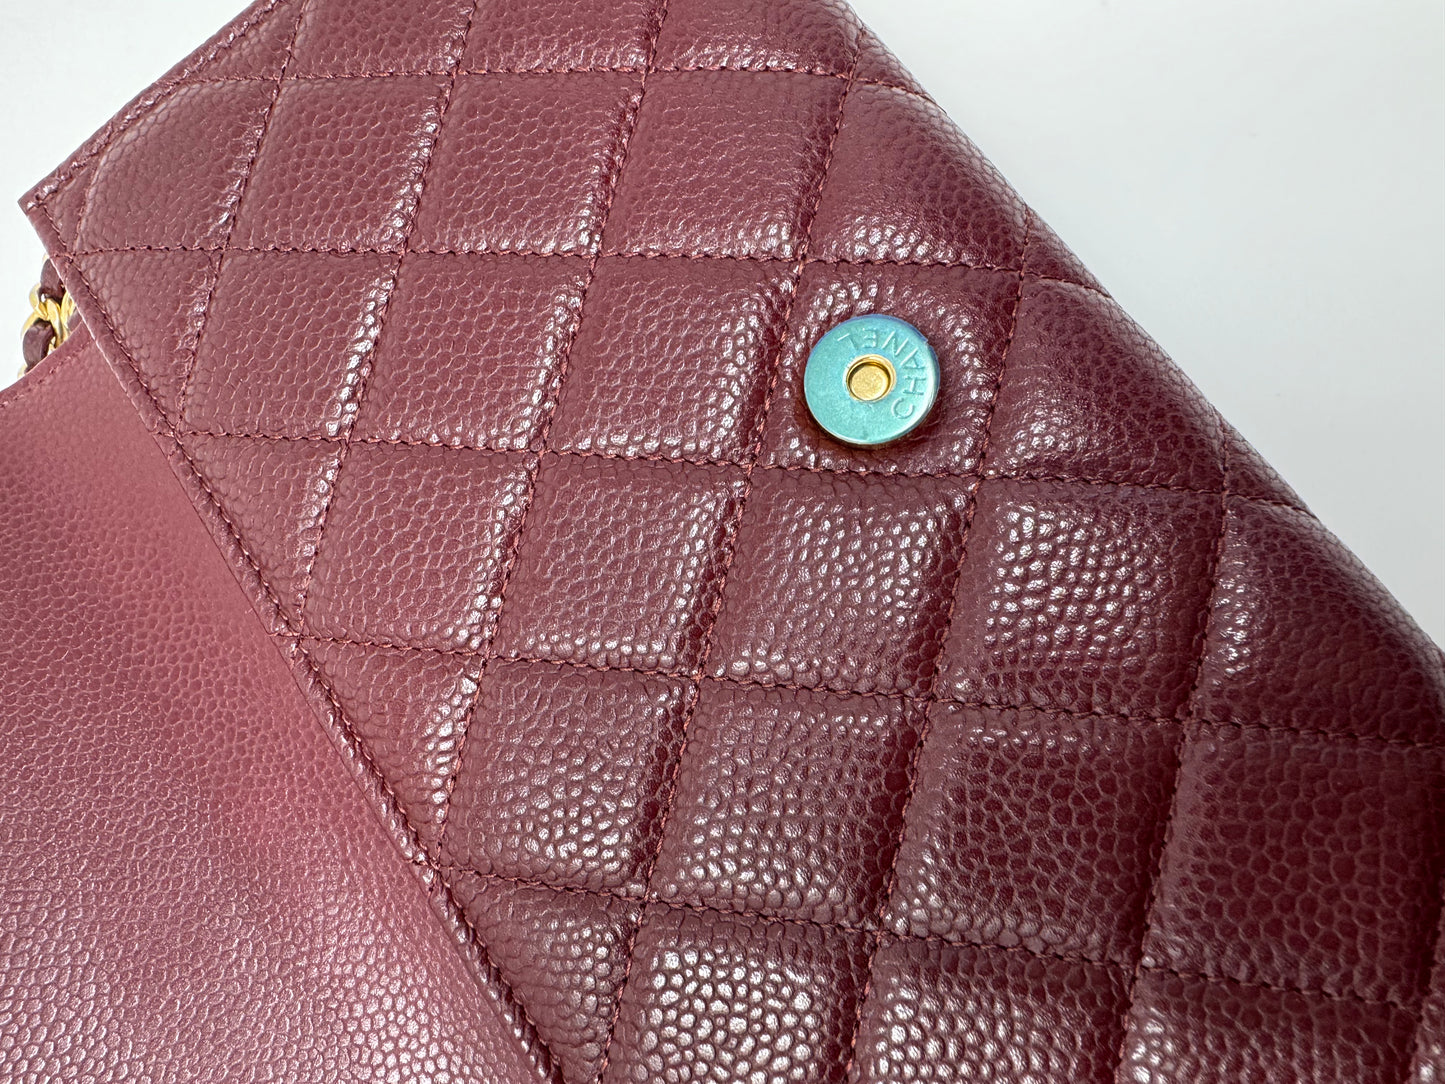 CHANEL BURGUNDY QUILTED CAVIAR LEATHER SHOULDER BAG WITH GOLD HARDWAREp